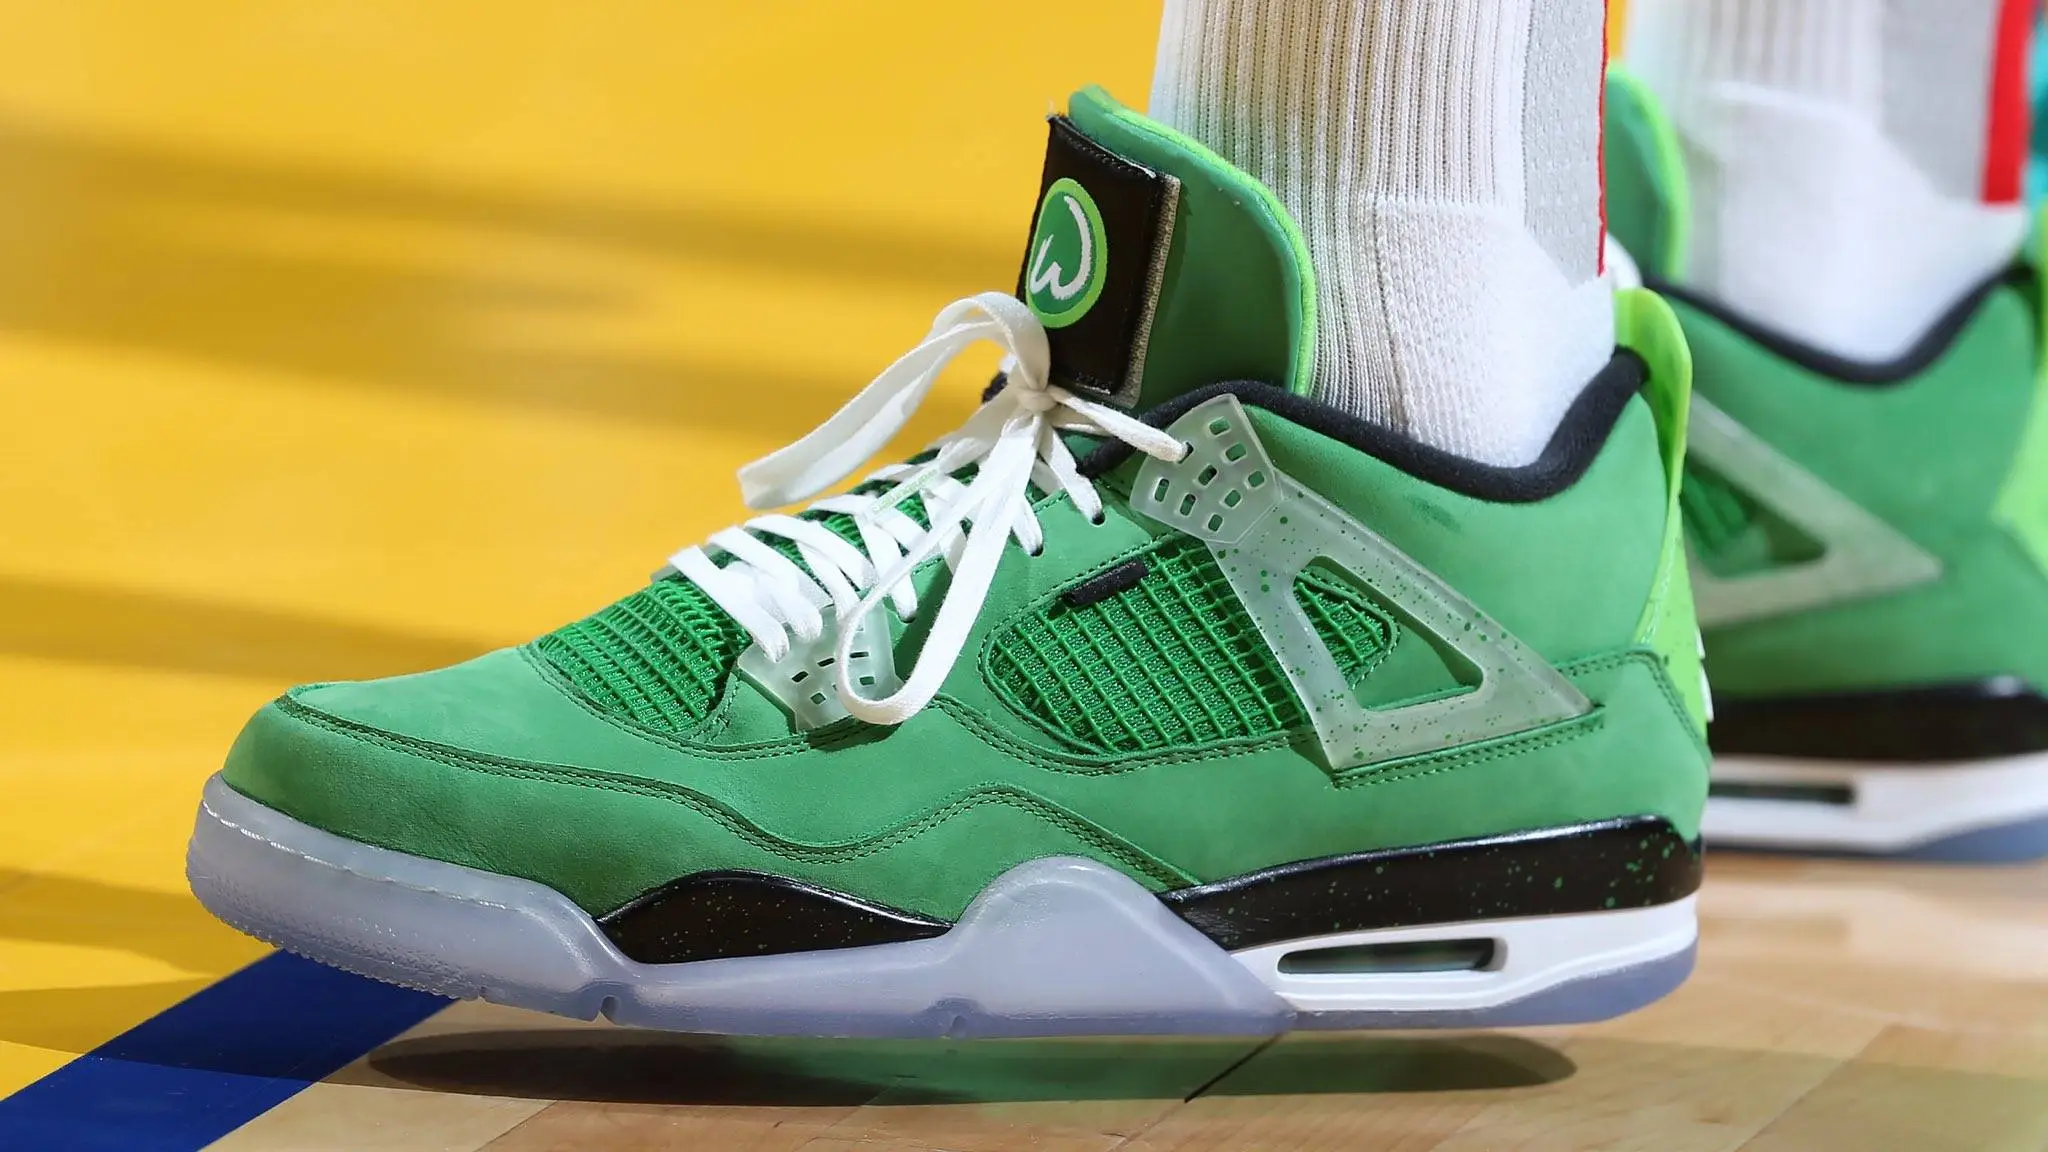 Air Jordan 4: The Definitive Guide to Colorways